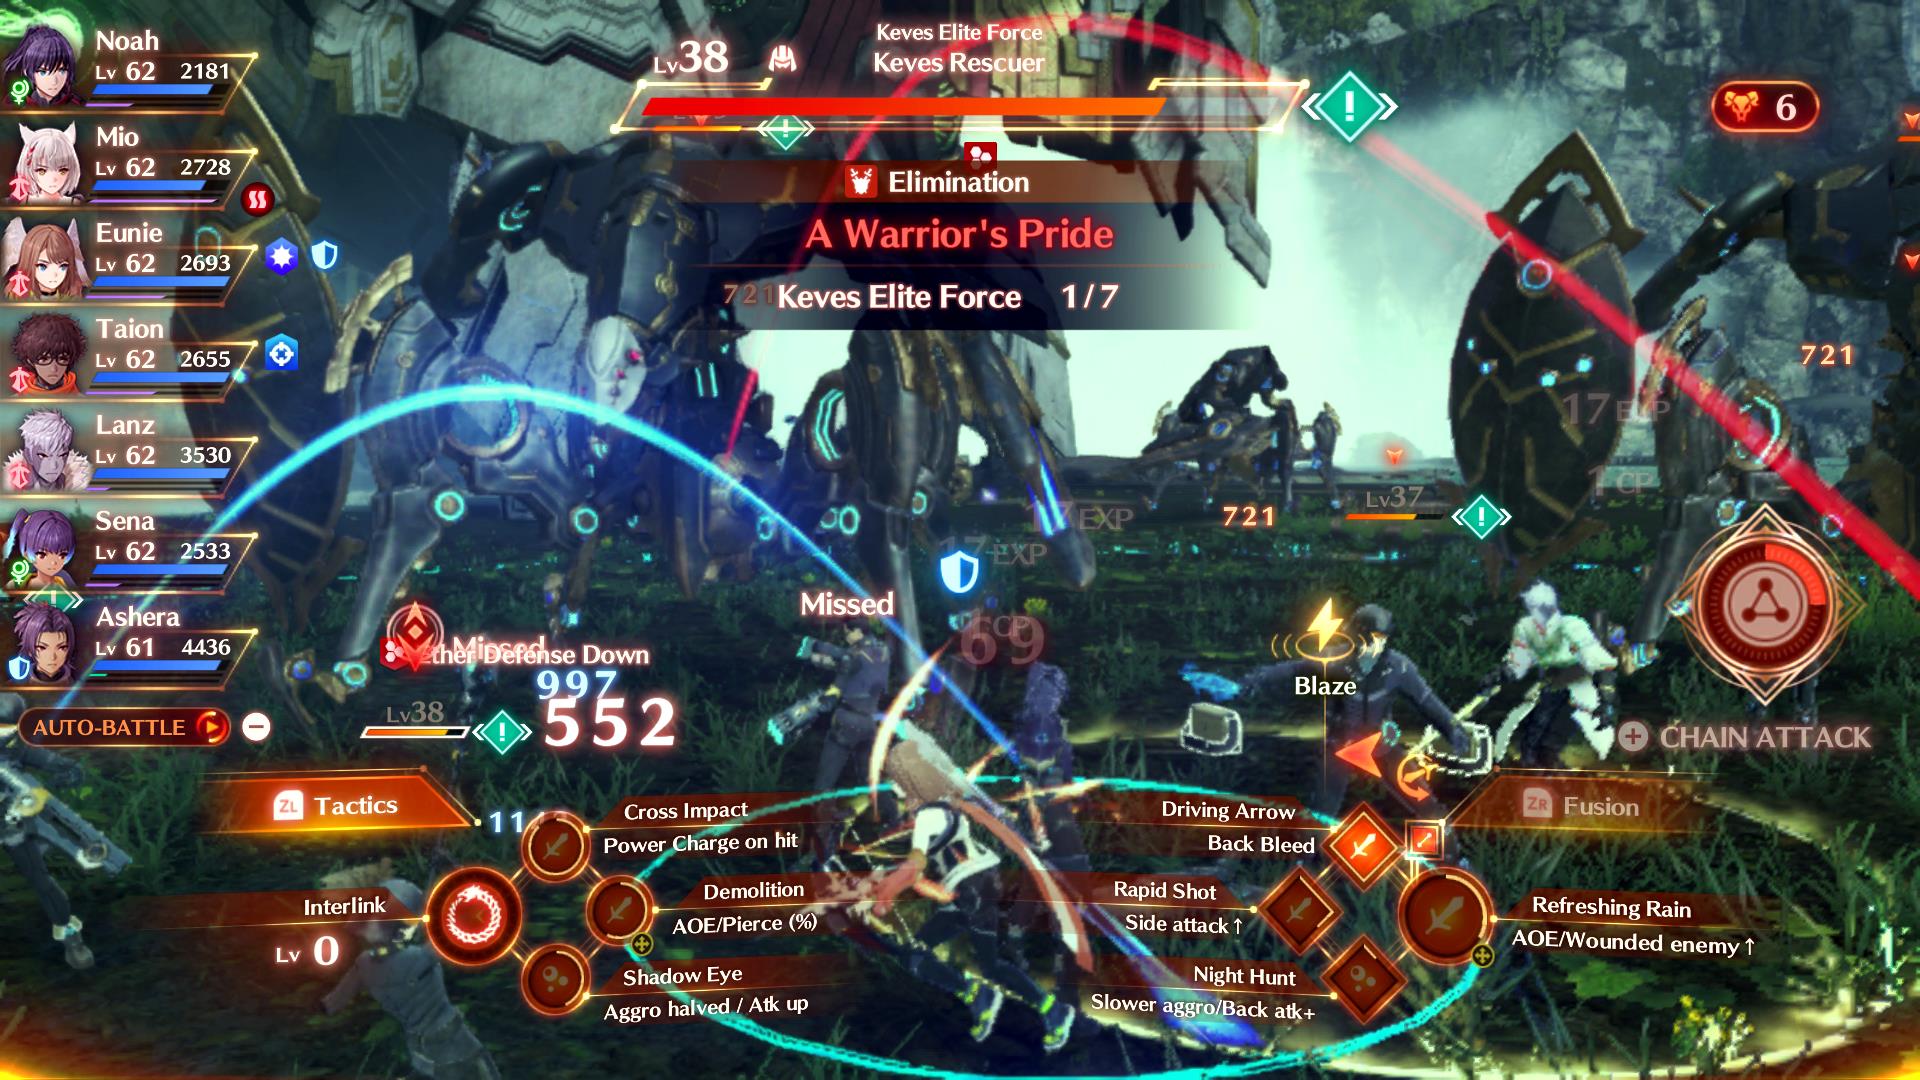 Xenoblade Chronicles 3 Review - A Brilliant RPG - MonsterVine